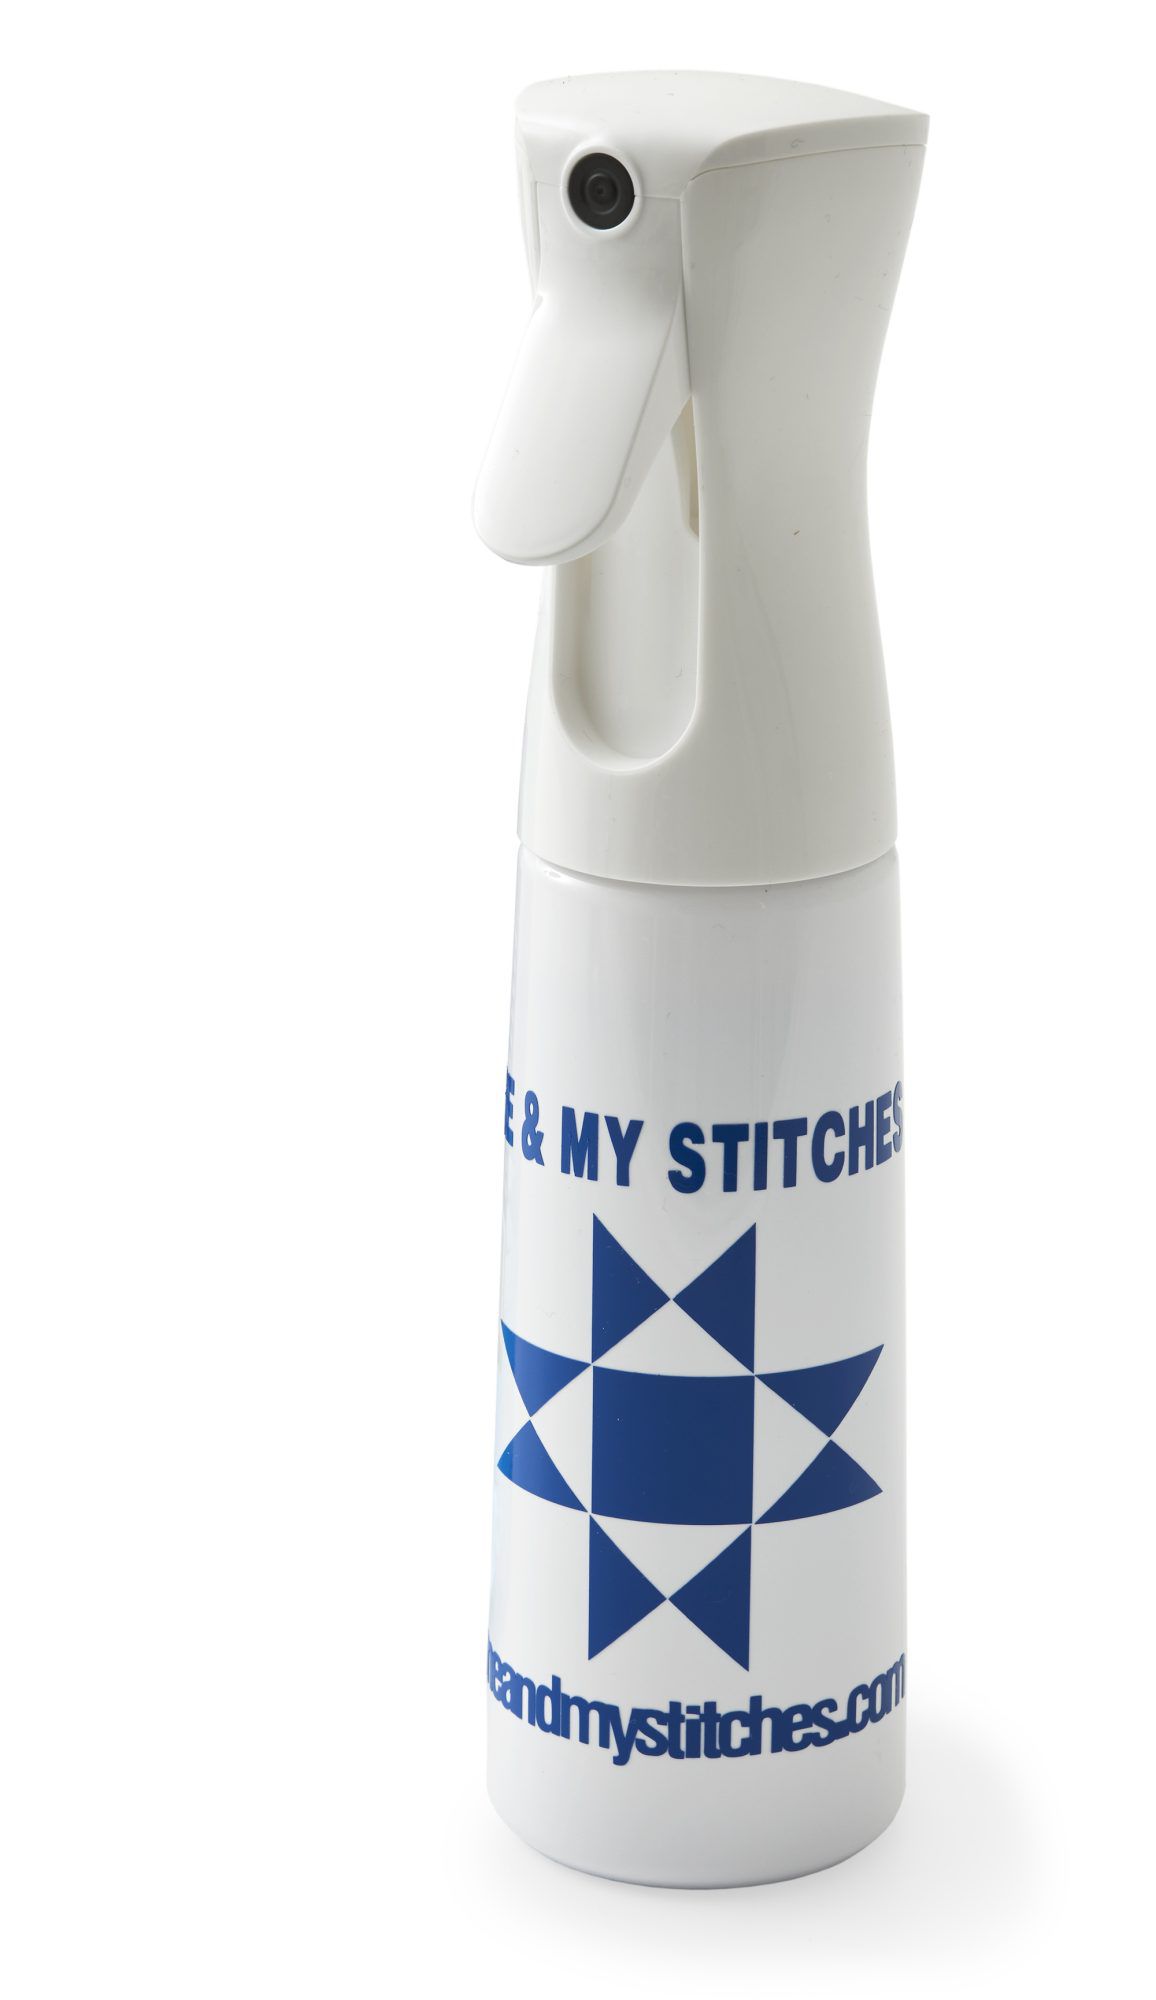 https://www.meandmystitches.com/product-page/best-spray-bottle-ever